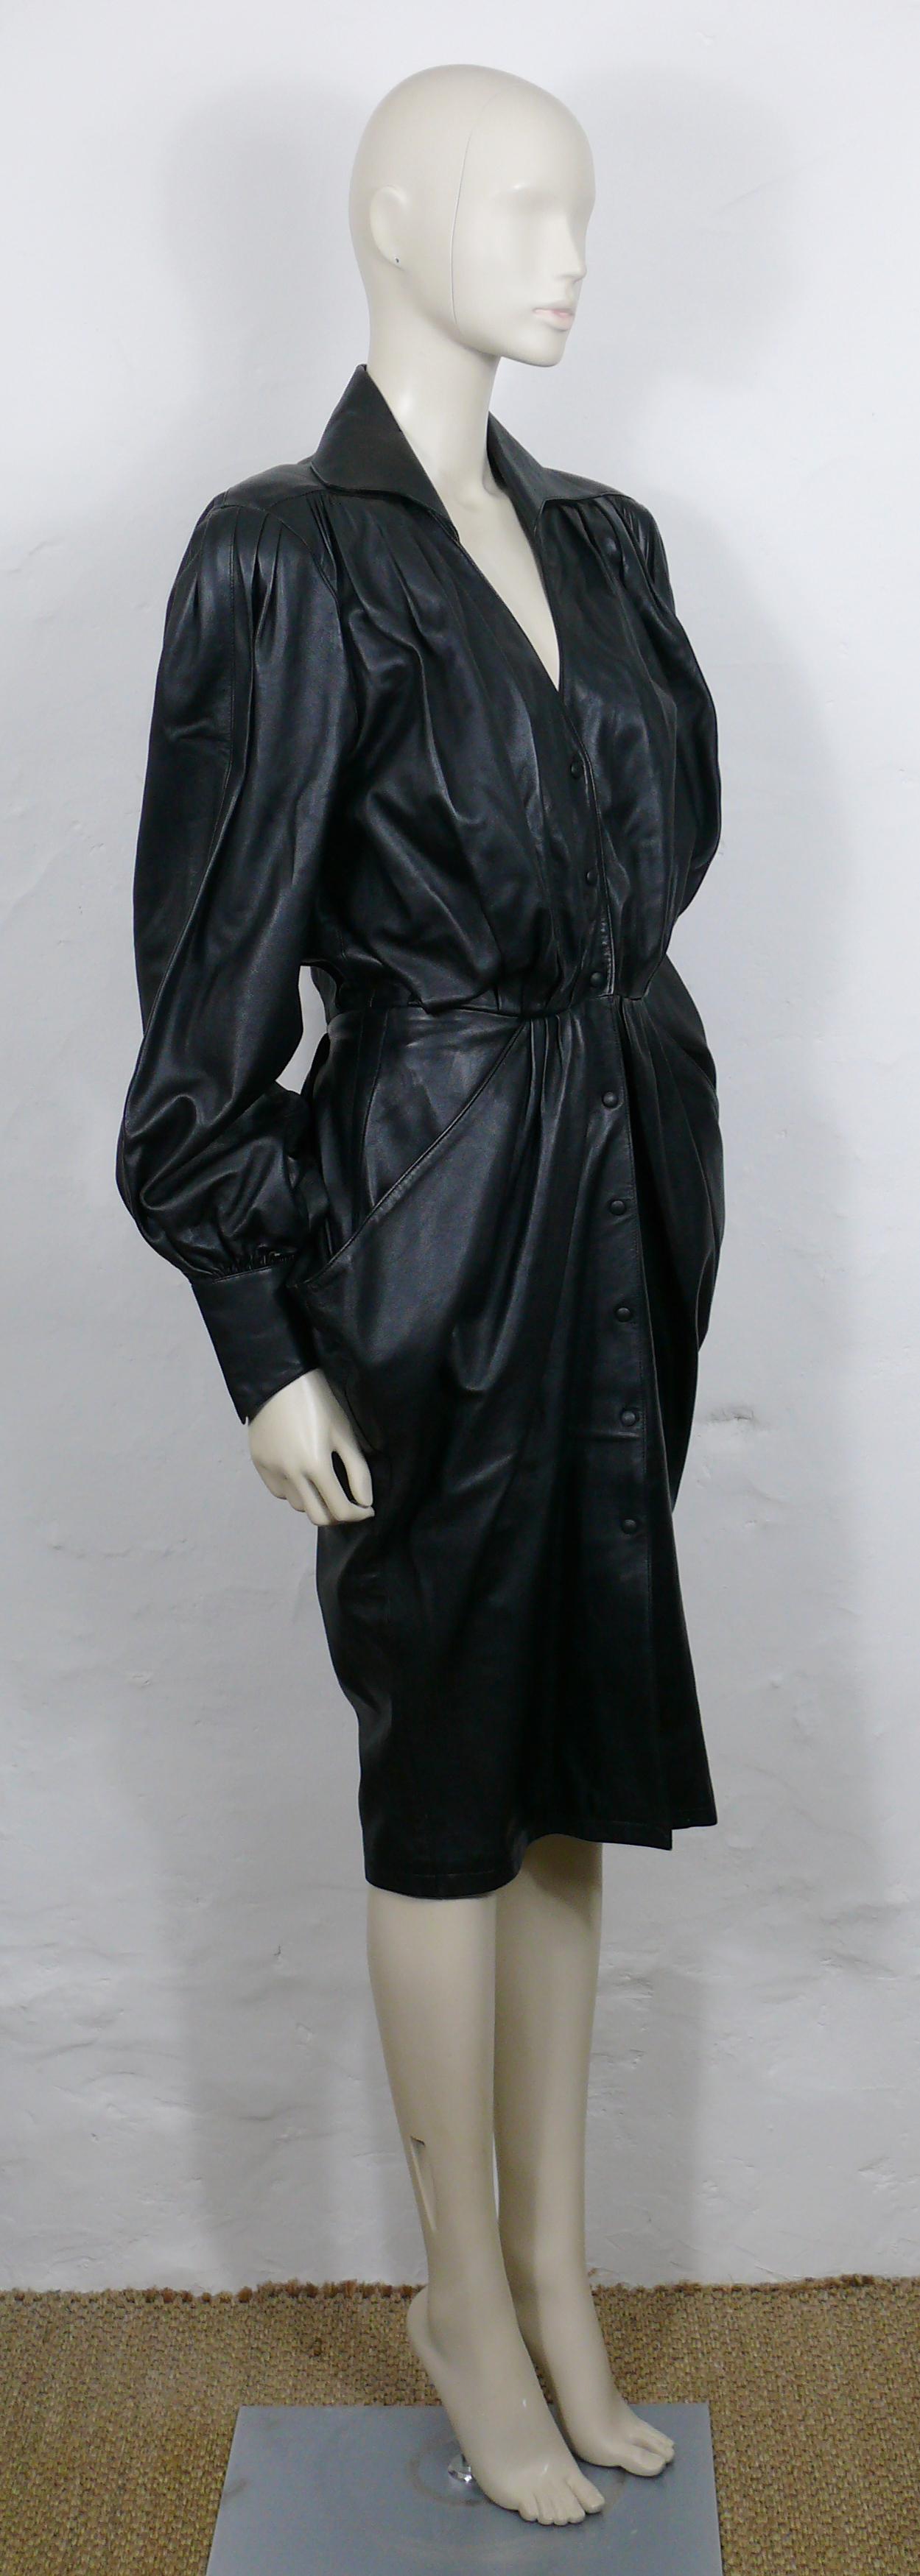 THIERRY MUGLER vintage black leather dress featuring MANFRED THIERRY MUGLER's typical sculptural cut, sensuality and aesthetic.

This dress features :
- Soft black leather (probably lambskin).
- Tight waist.
- Exagerated shoulders with shoulder